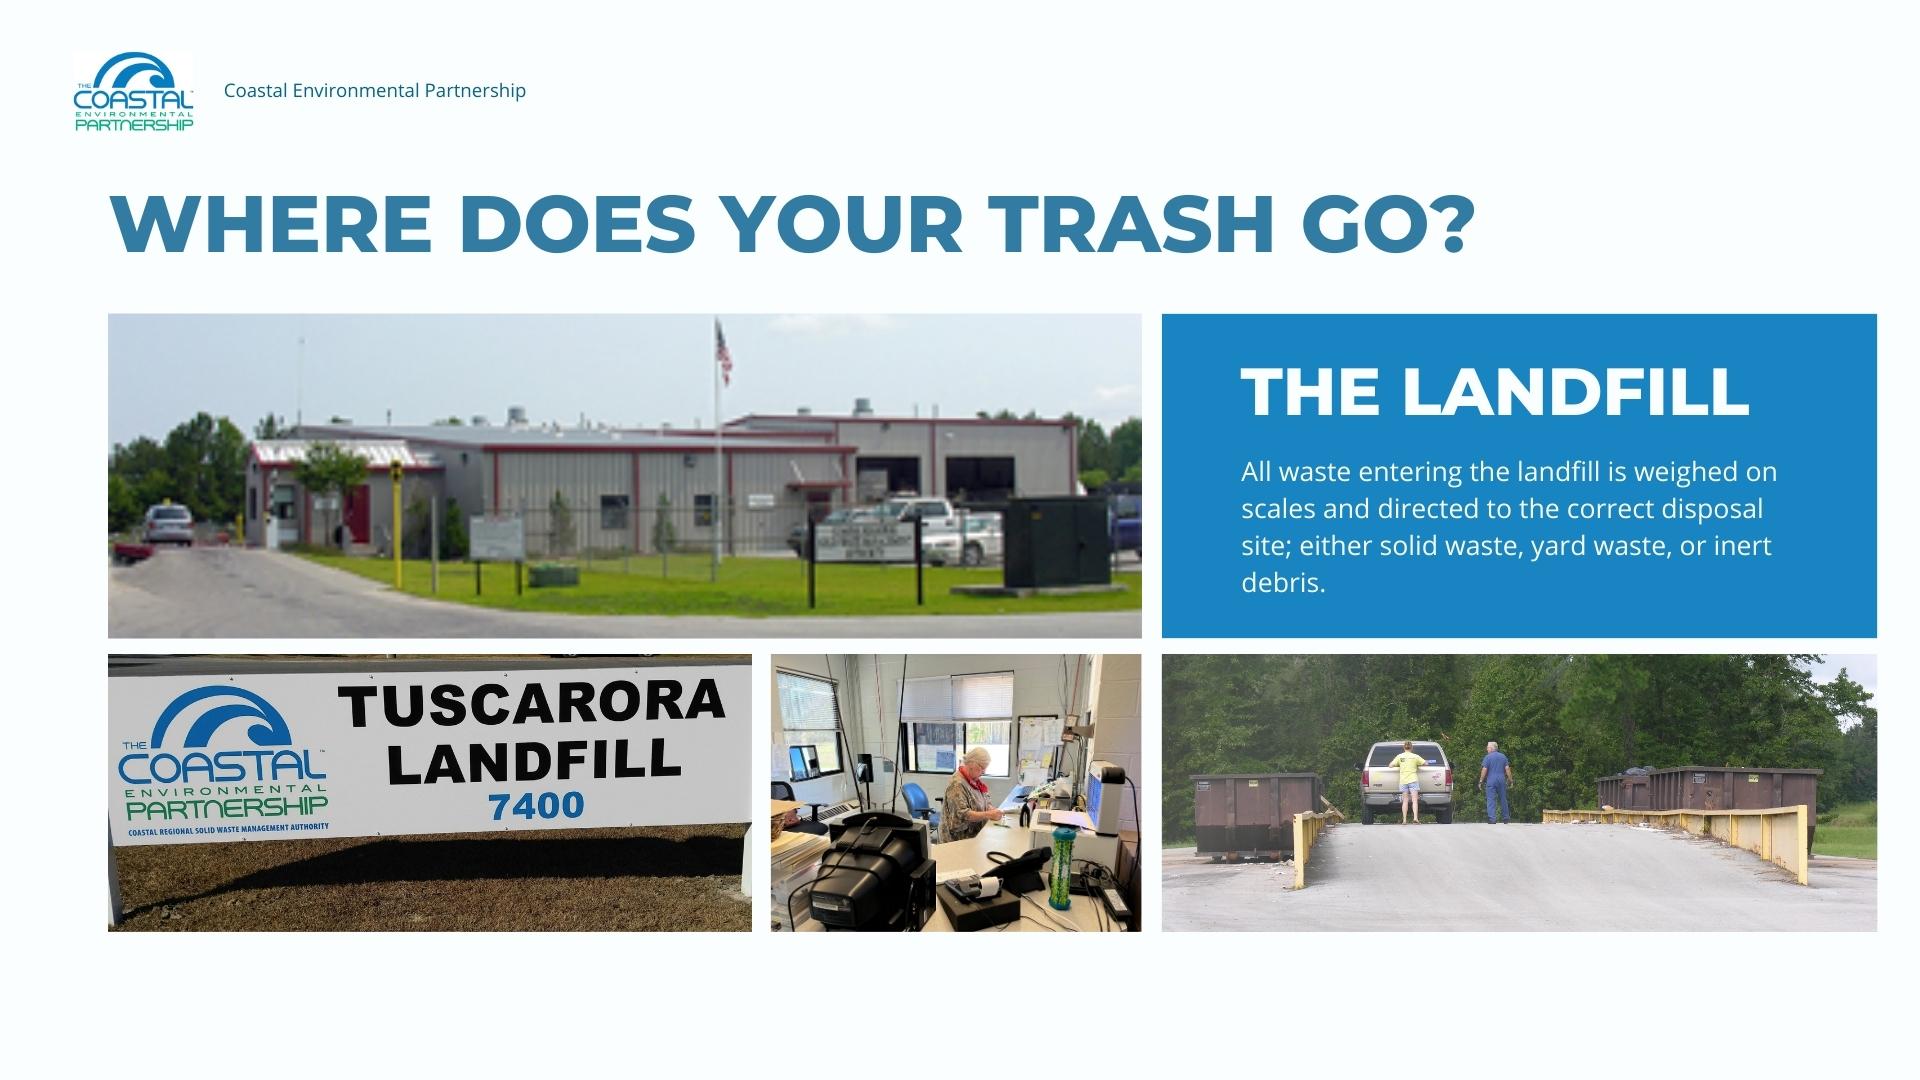 slide with pictures of the landfill (sign, scale house, convenience site), text says: All waste entering the landfill is weighed on scales and directed to the correct disposal site; either solid waste, yard waste, or inert debris. 